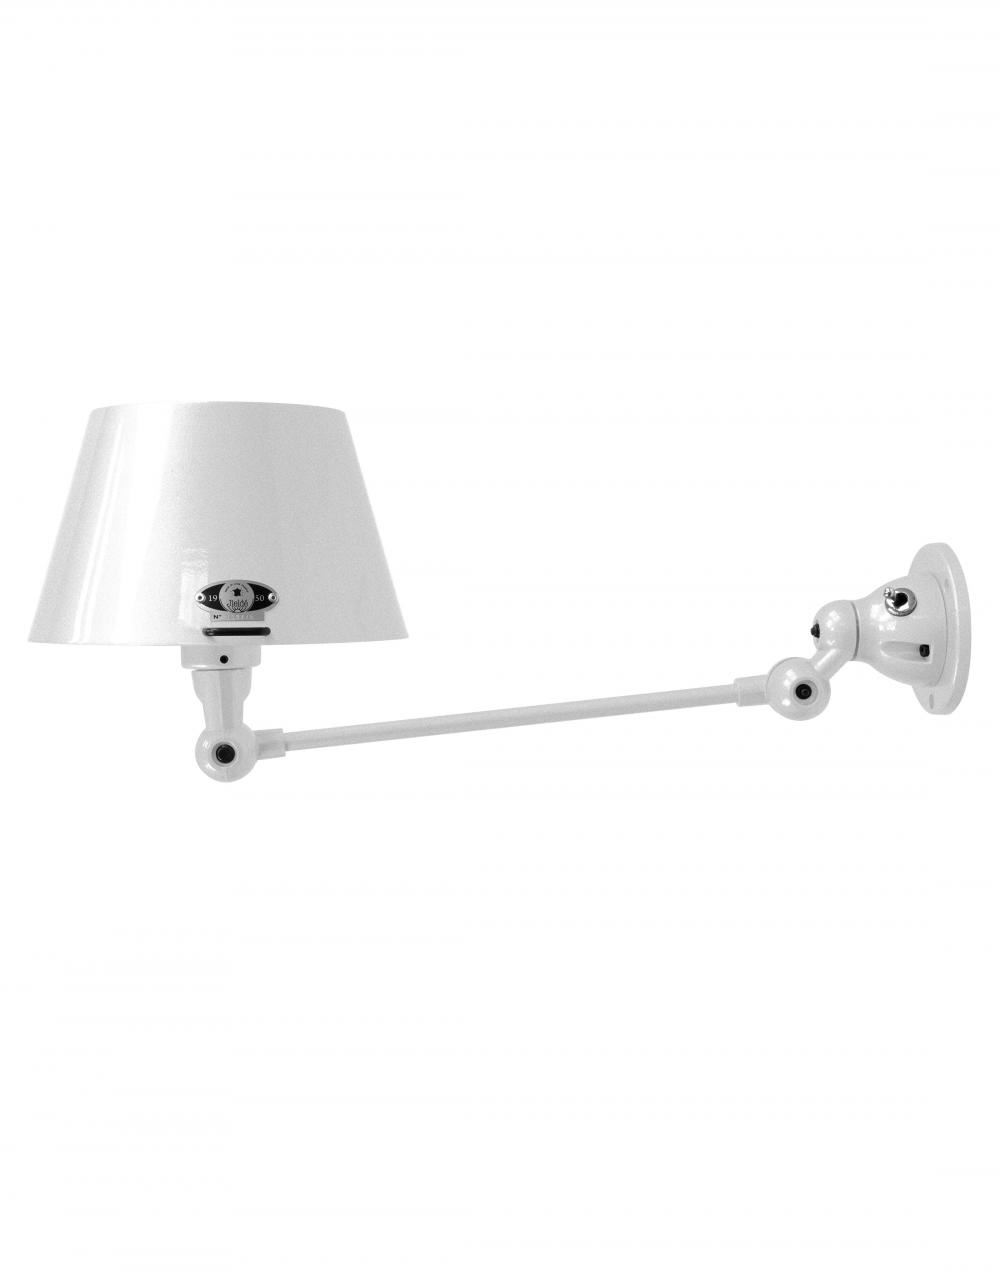 Jielde Aicler One Arm Adjustable Wall Light Straight Shade Silver Grey Gloss Integral Switch On Wall Base